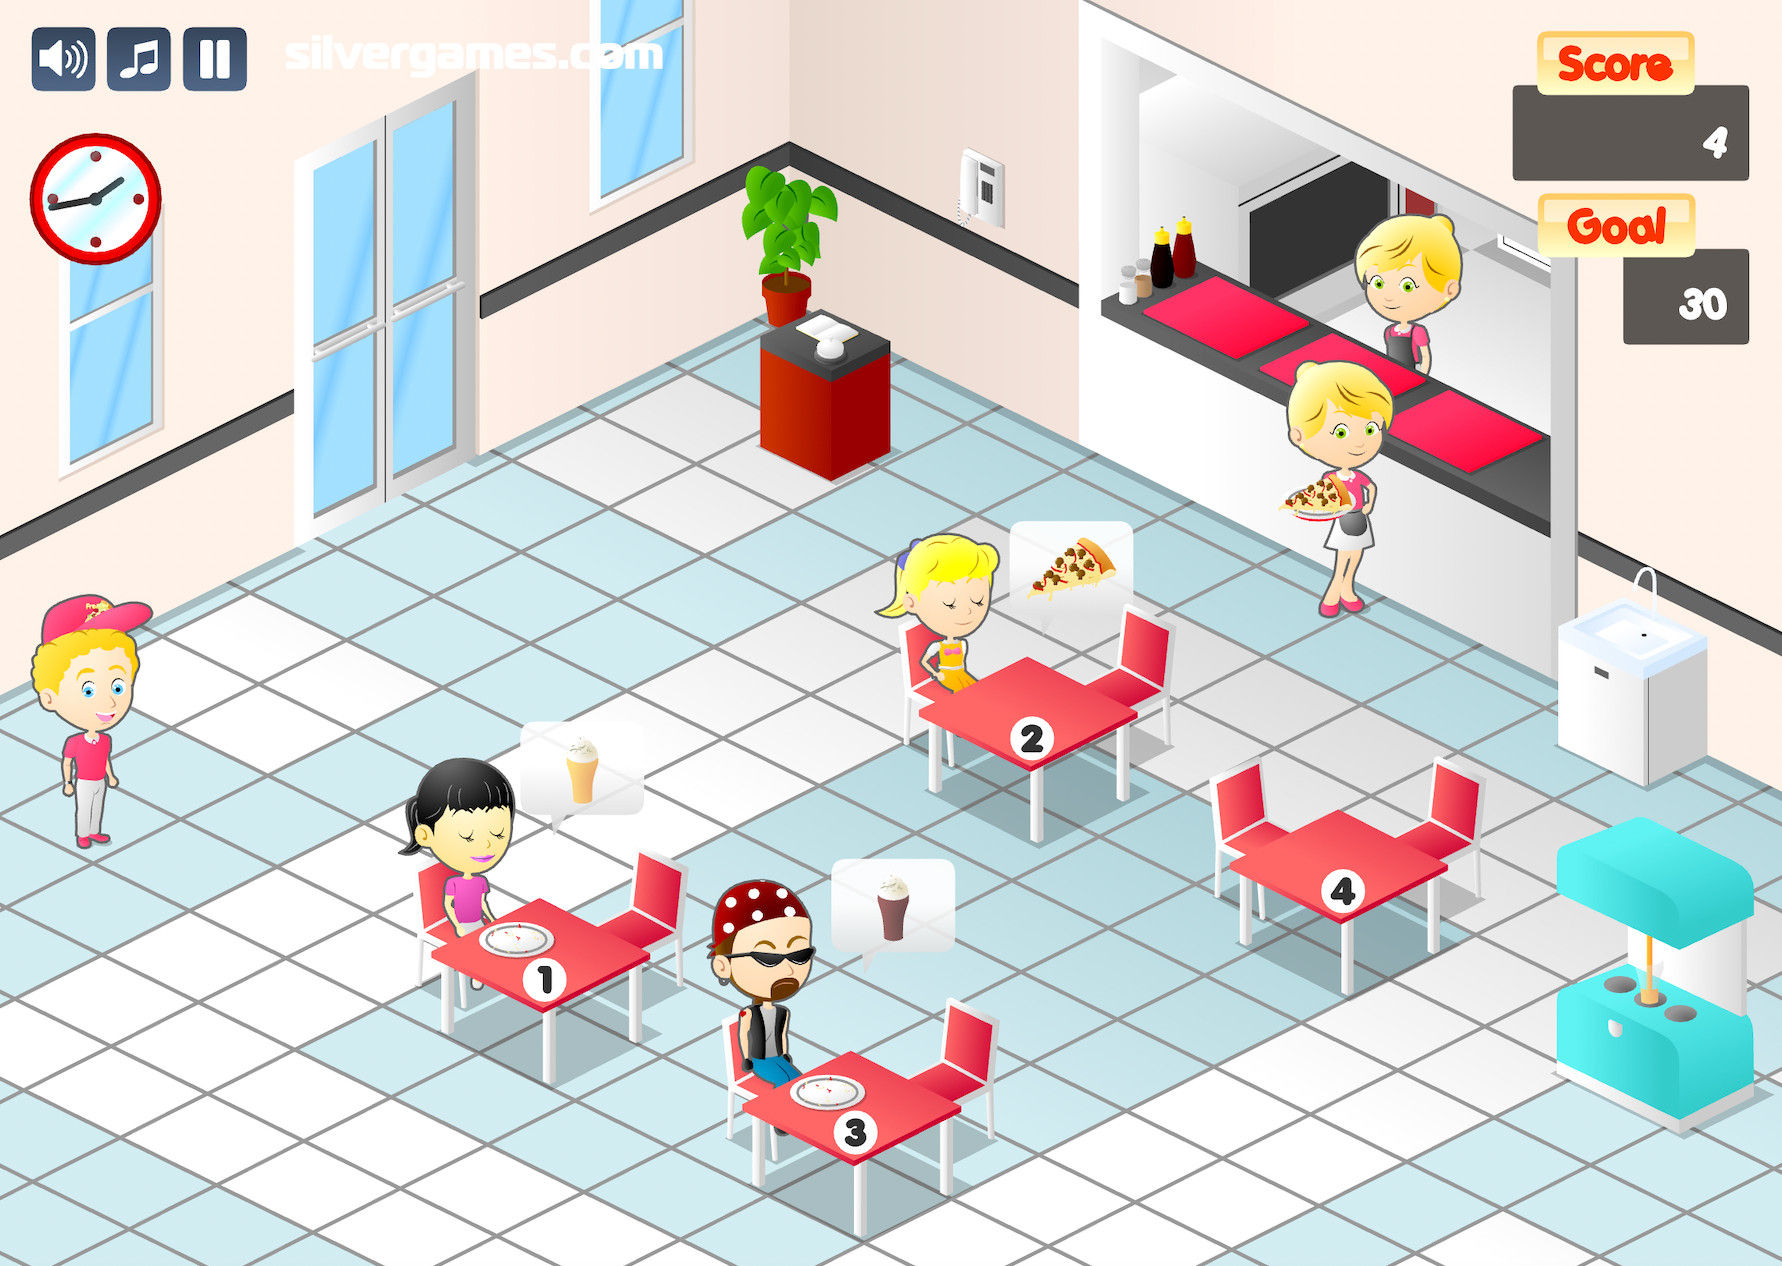 Diner City - Play Online on SilverGames 🕹️